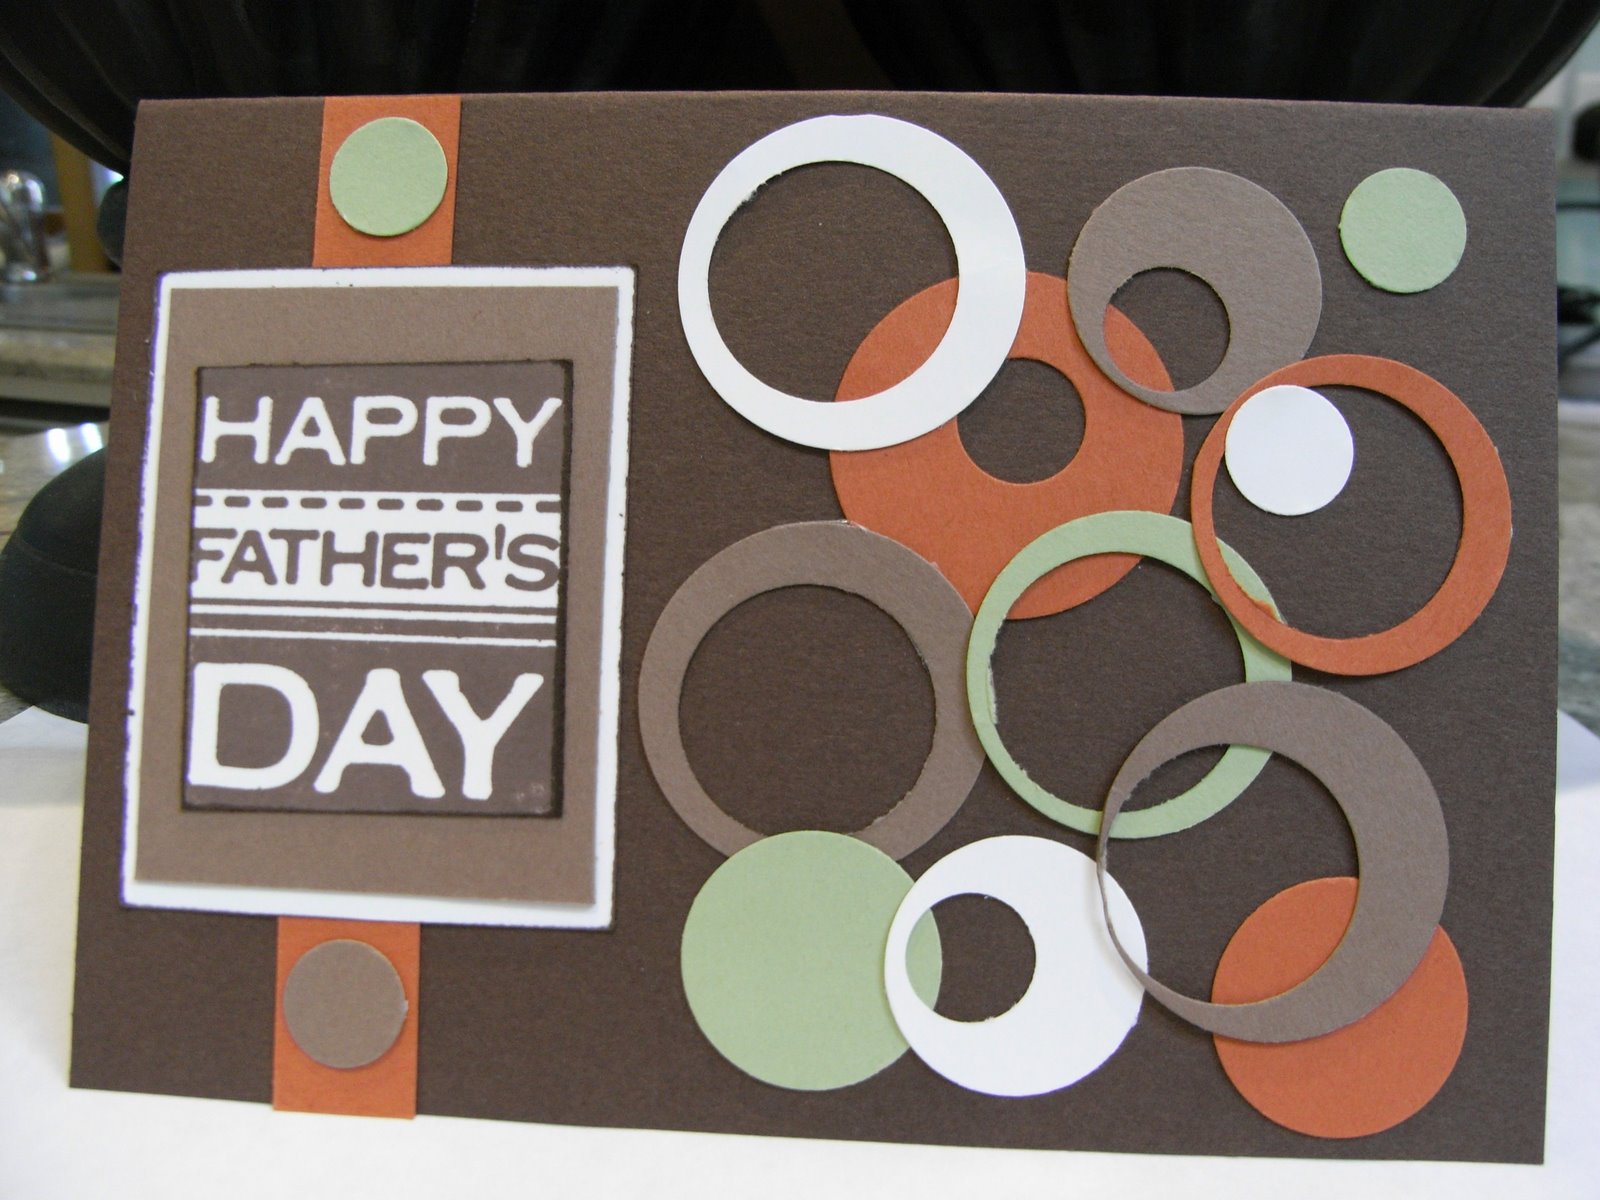 [Fathers+Day+Cards+KWerner+15+001.jpg]